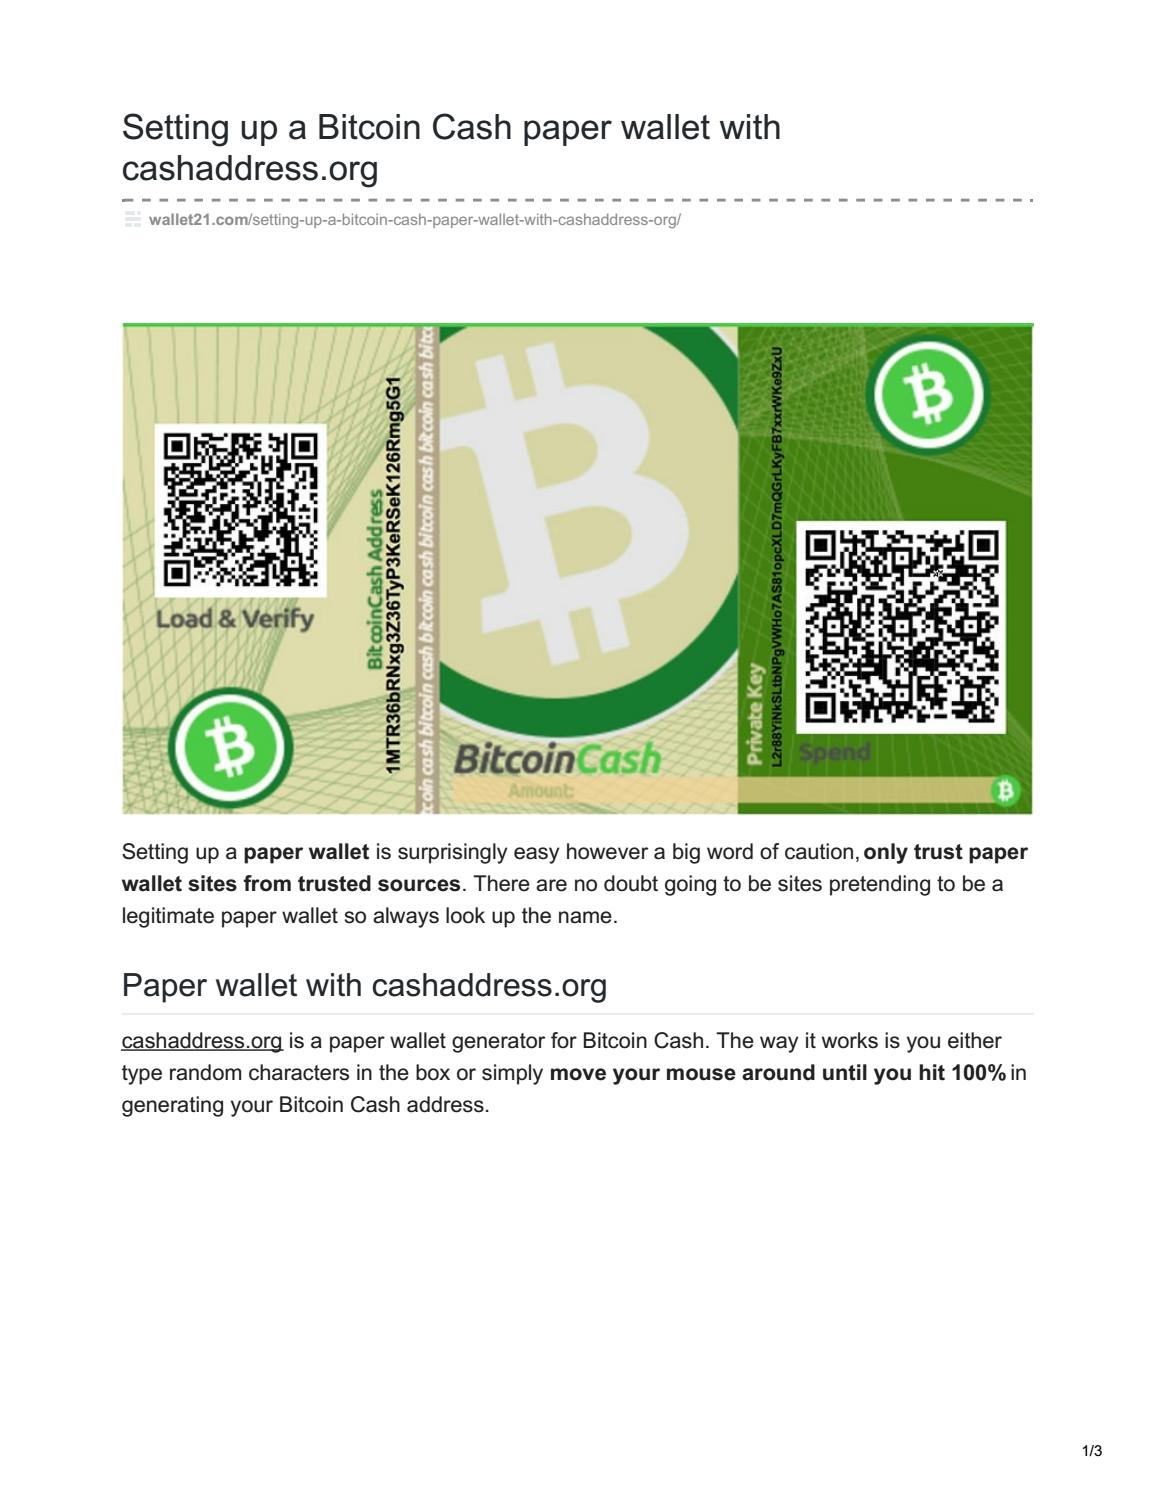 ecobt.ru - Universal Paper wallet generator for Bitcoin and other Cryptocurrencies